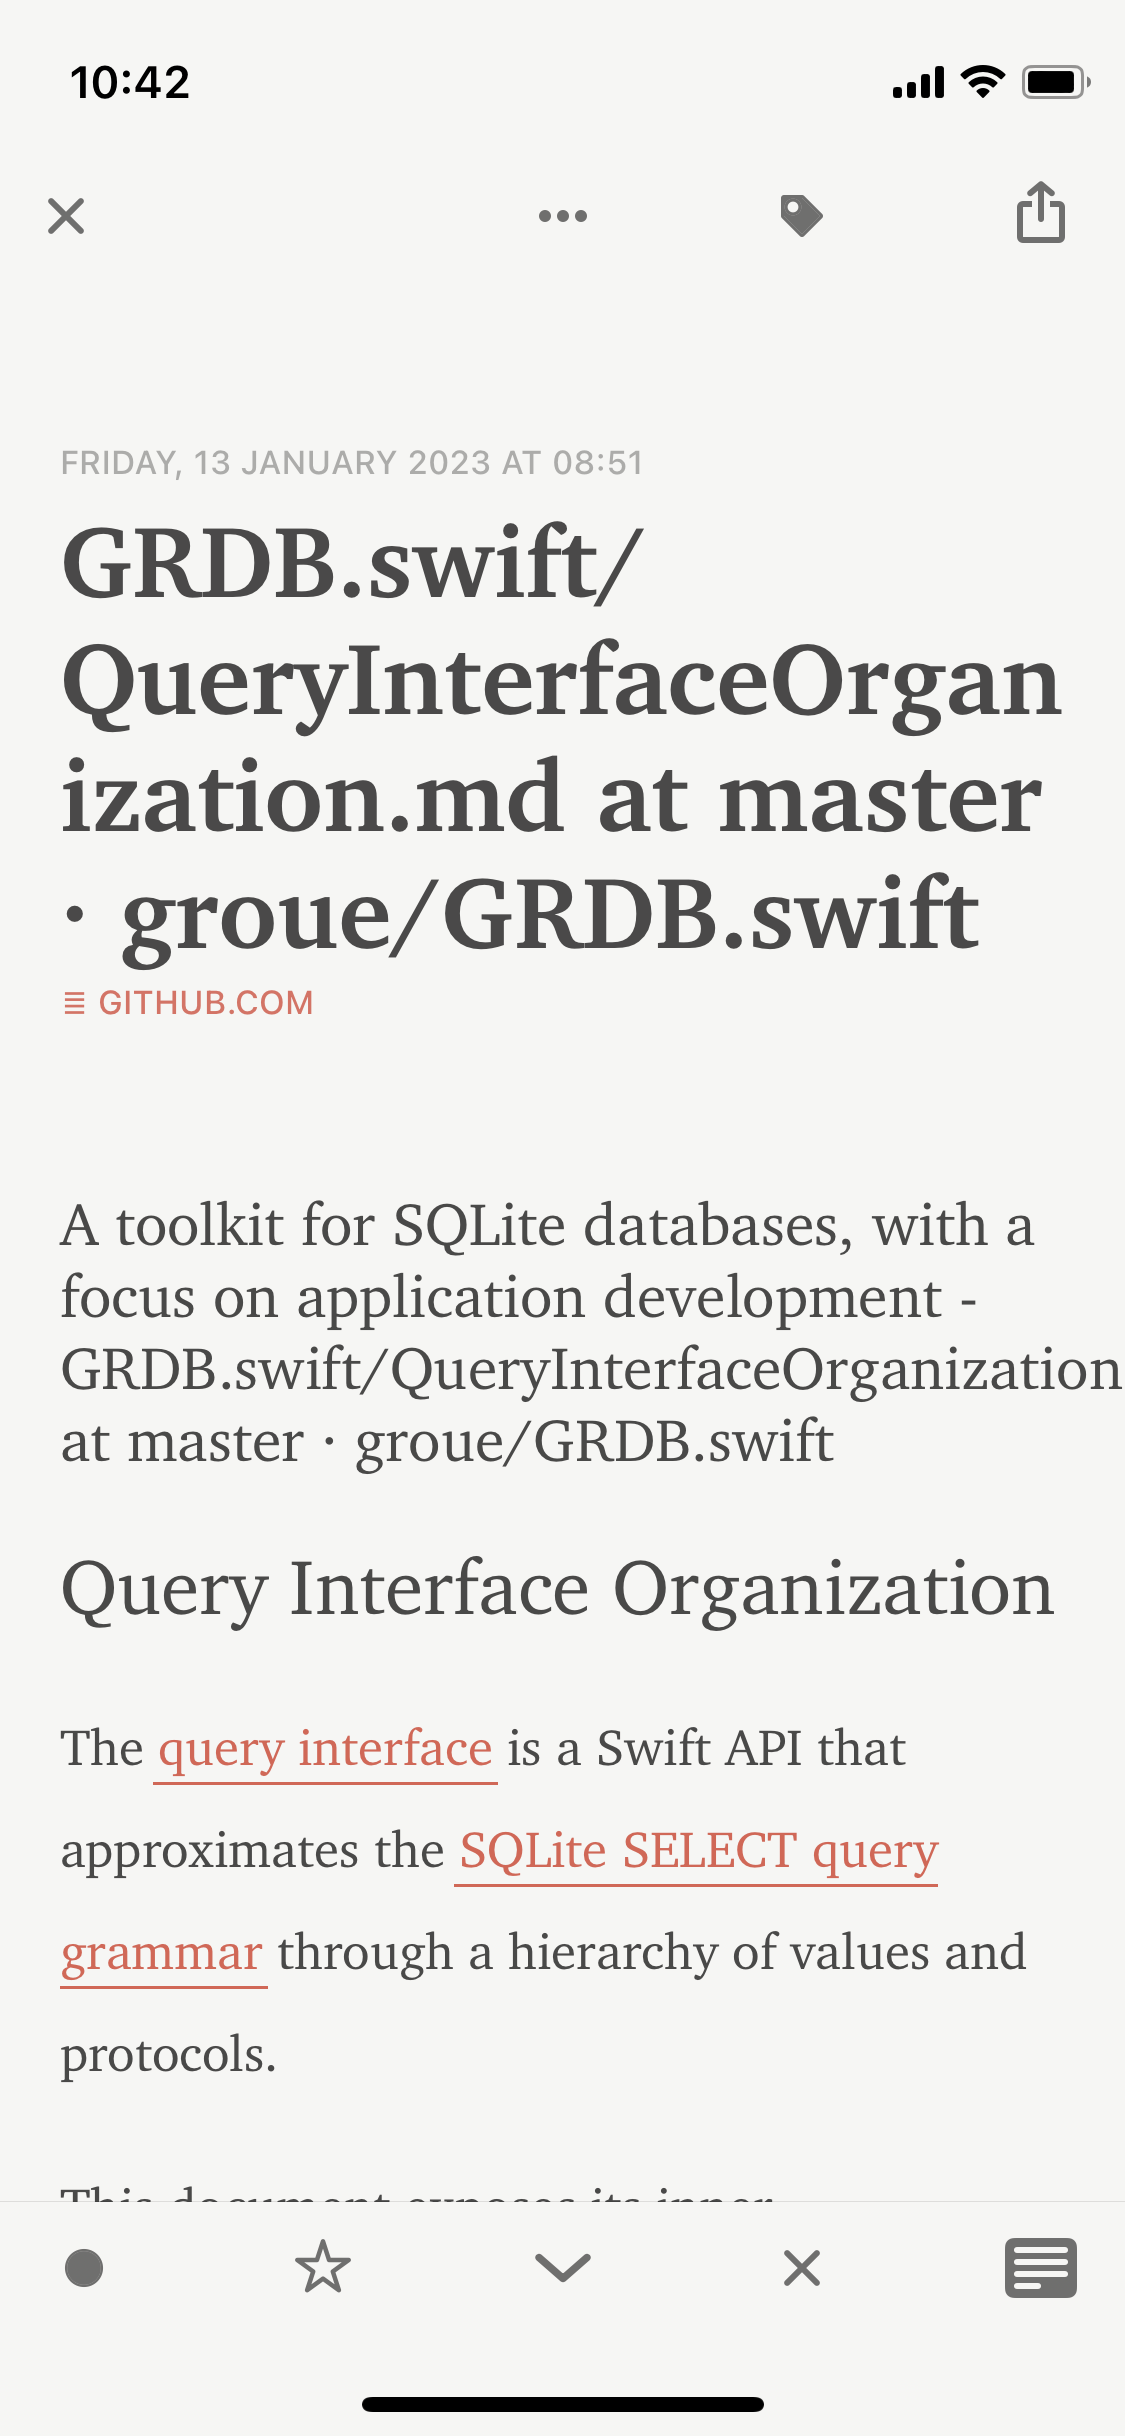 Reeder had no trouble parsing or rendering this article.